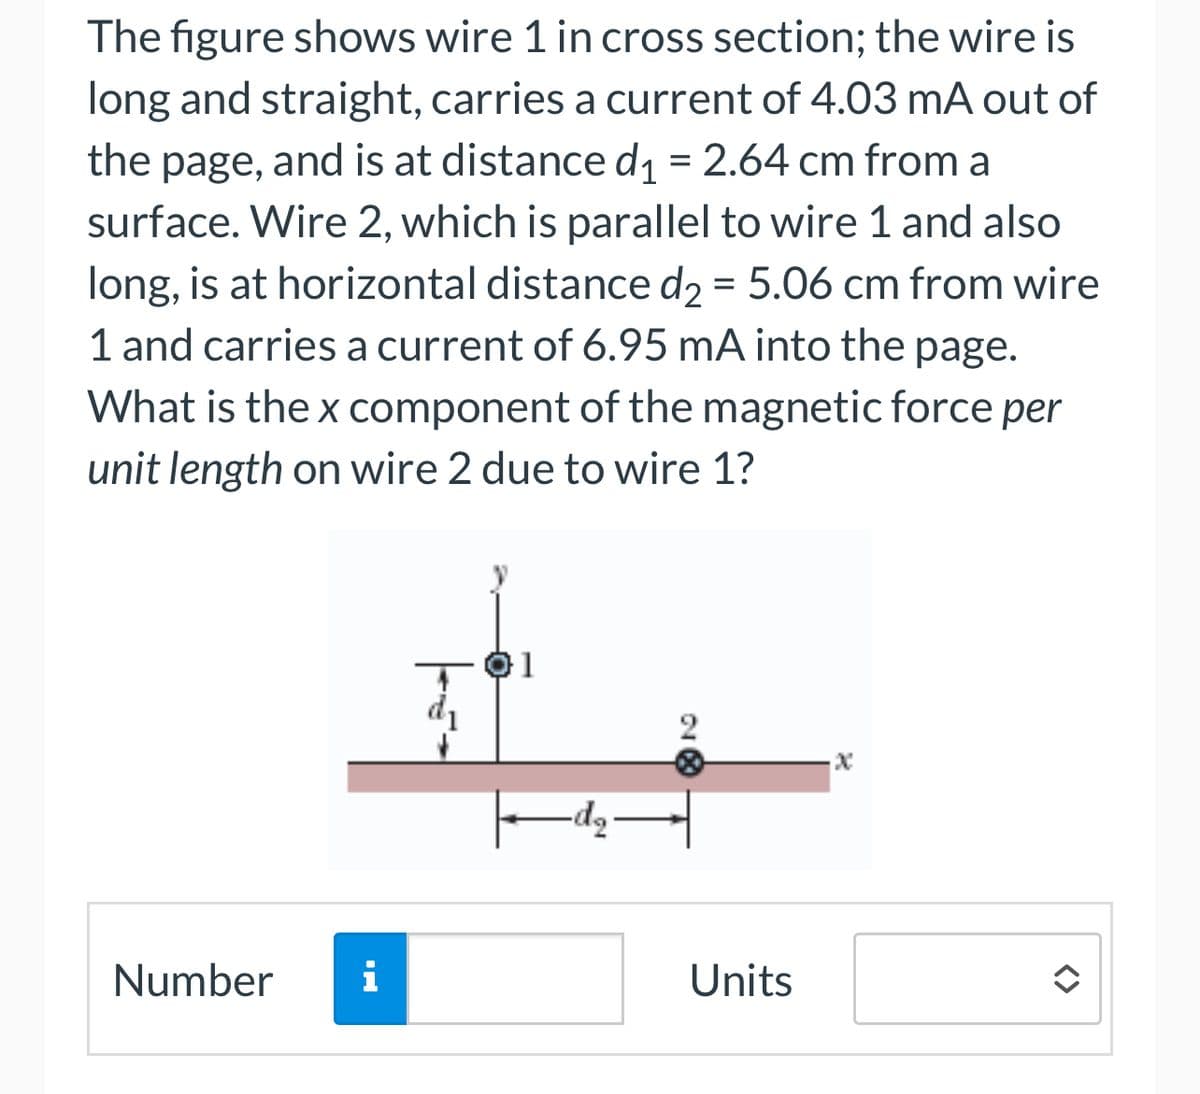 The figure shows wire 1 in cross section; the wire is
long and straight, carries a current of 4.03 mA out of
the page, and is at distance d₁ = 2.64 cm from a
surface. Wire 2, which is parallel to wire 1 and also
long, is at horizontal distance d₂ = 5.06 cm from wire
1 and carries a current of 6.95 mA into the page.
What is the x component of the magnetic force per
unit length on wire 2 due to wire 1?
Number
d₁
22
MI
i
Units
x
<>